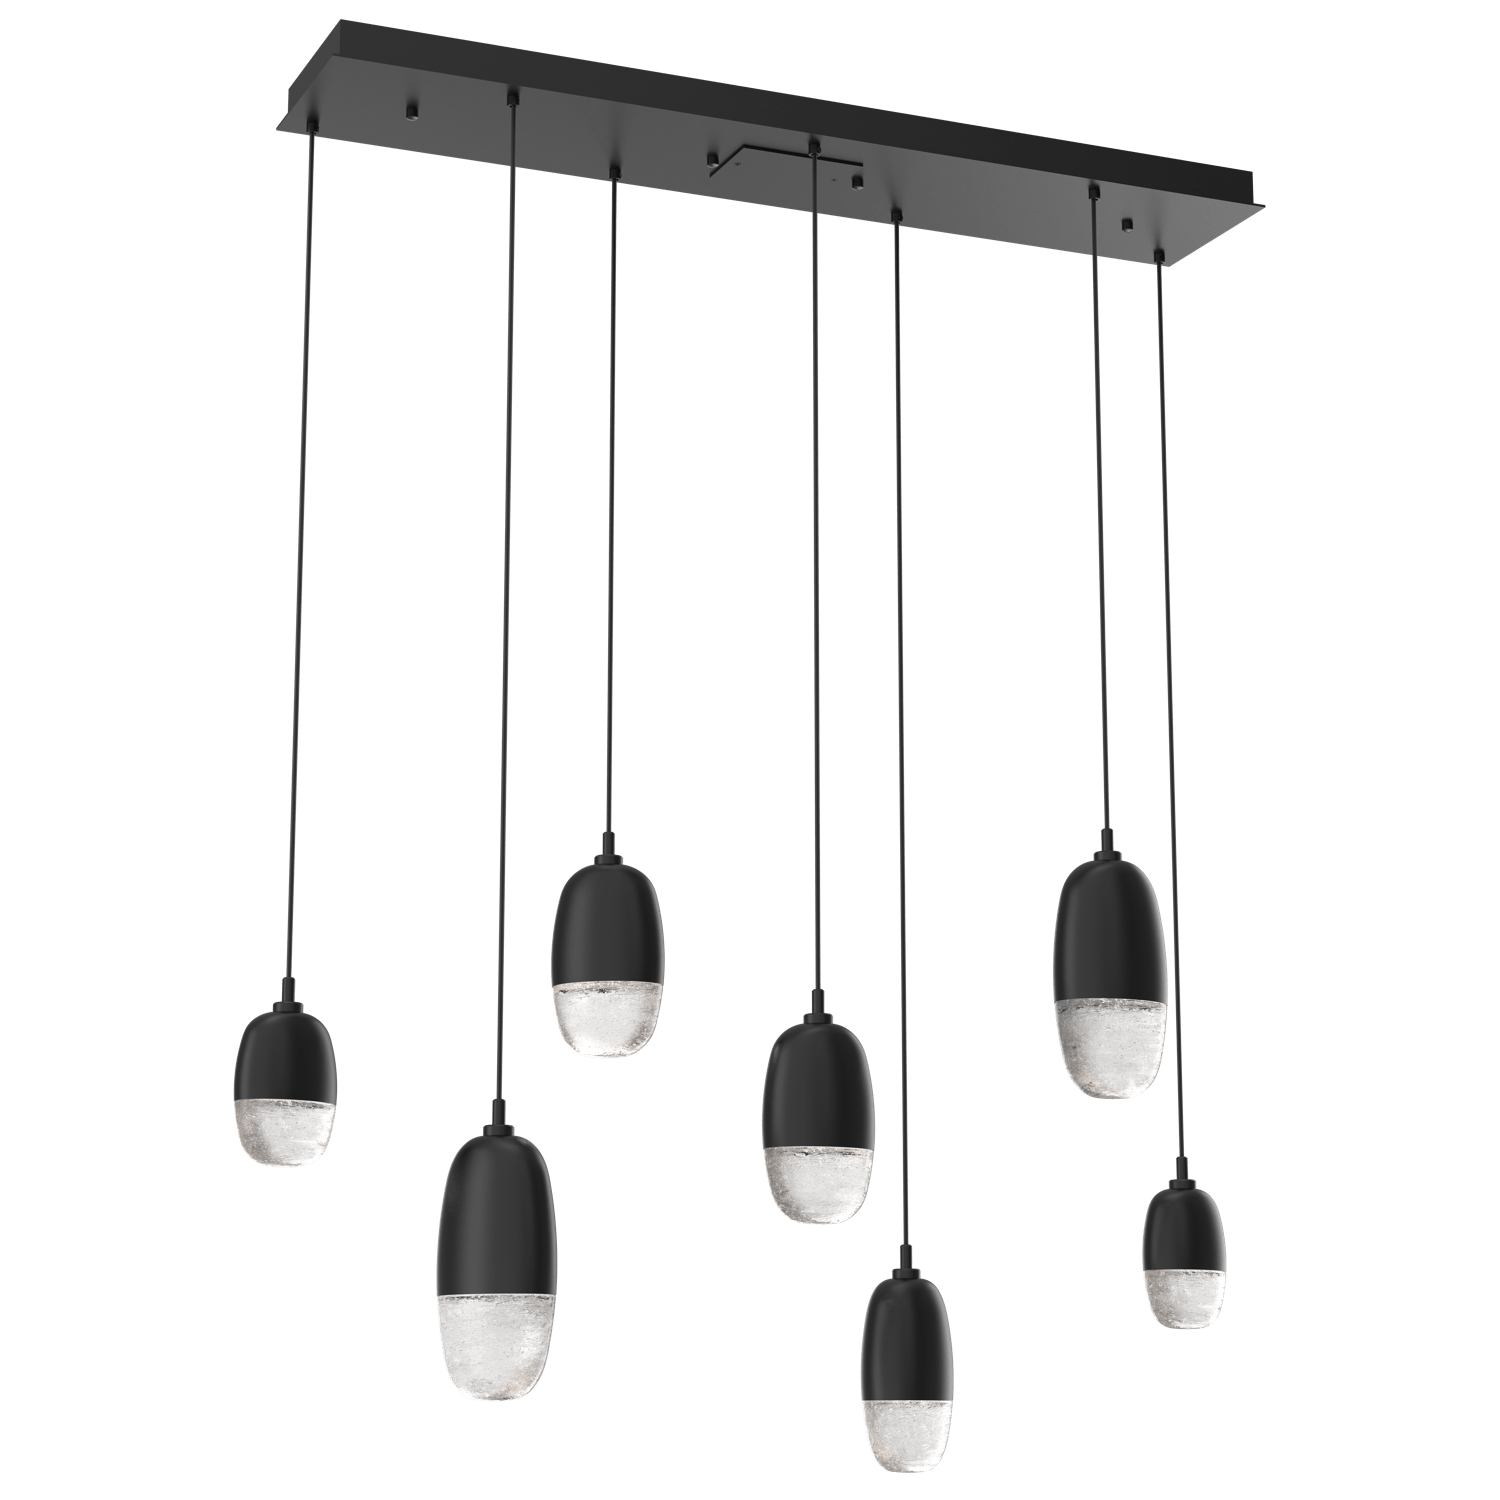 PLB0079-07-MB-Hammerton-Studio-Pebble-7-light-linear-pendant-chandelier-with-matte-black-finish-and-clear-cast-glass-shades-and-LED-lamping